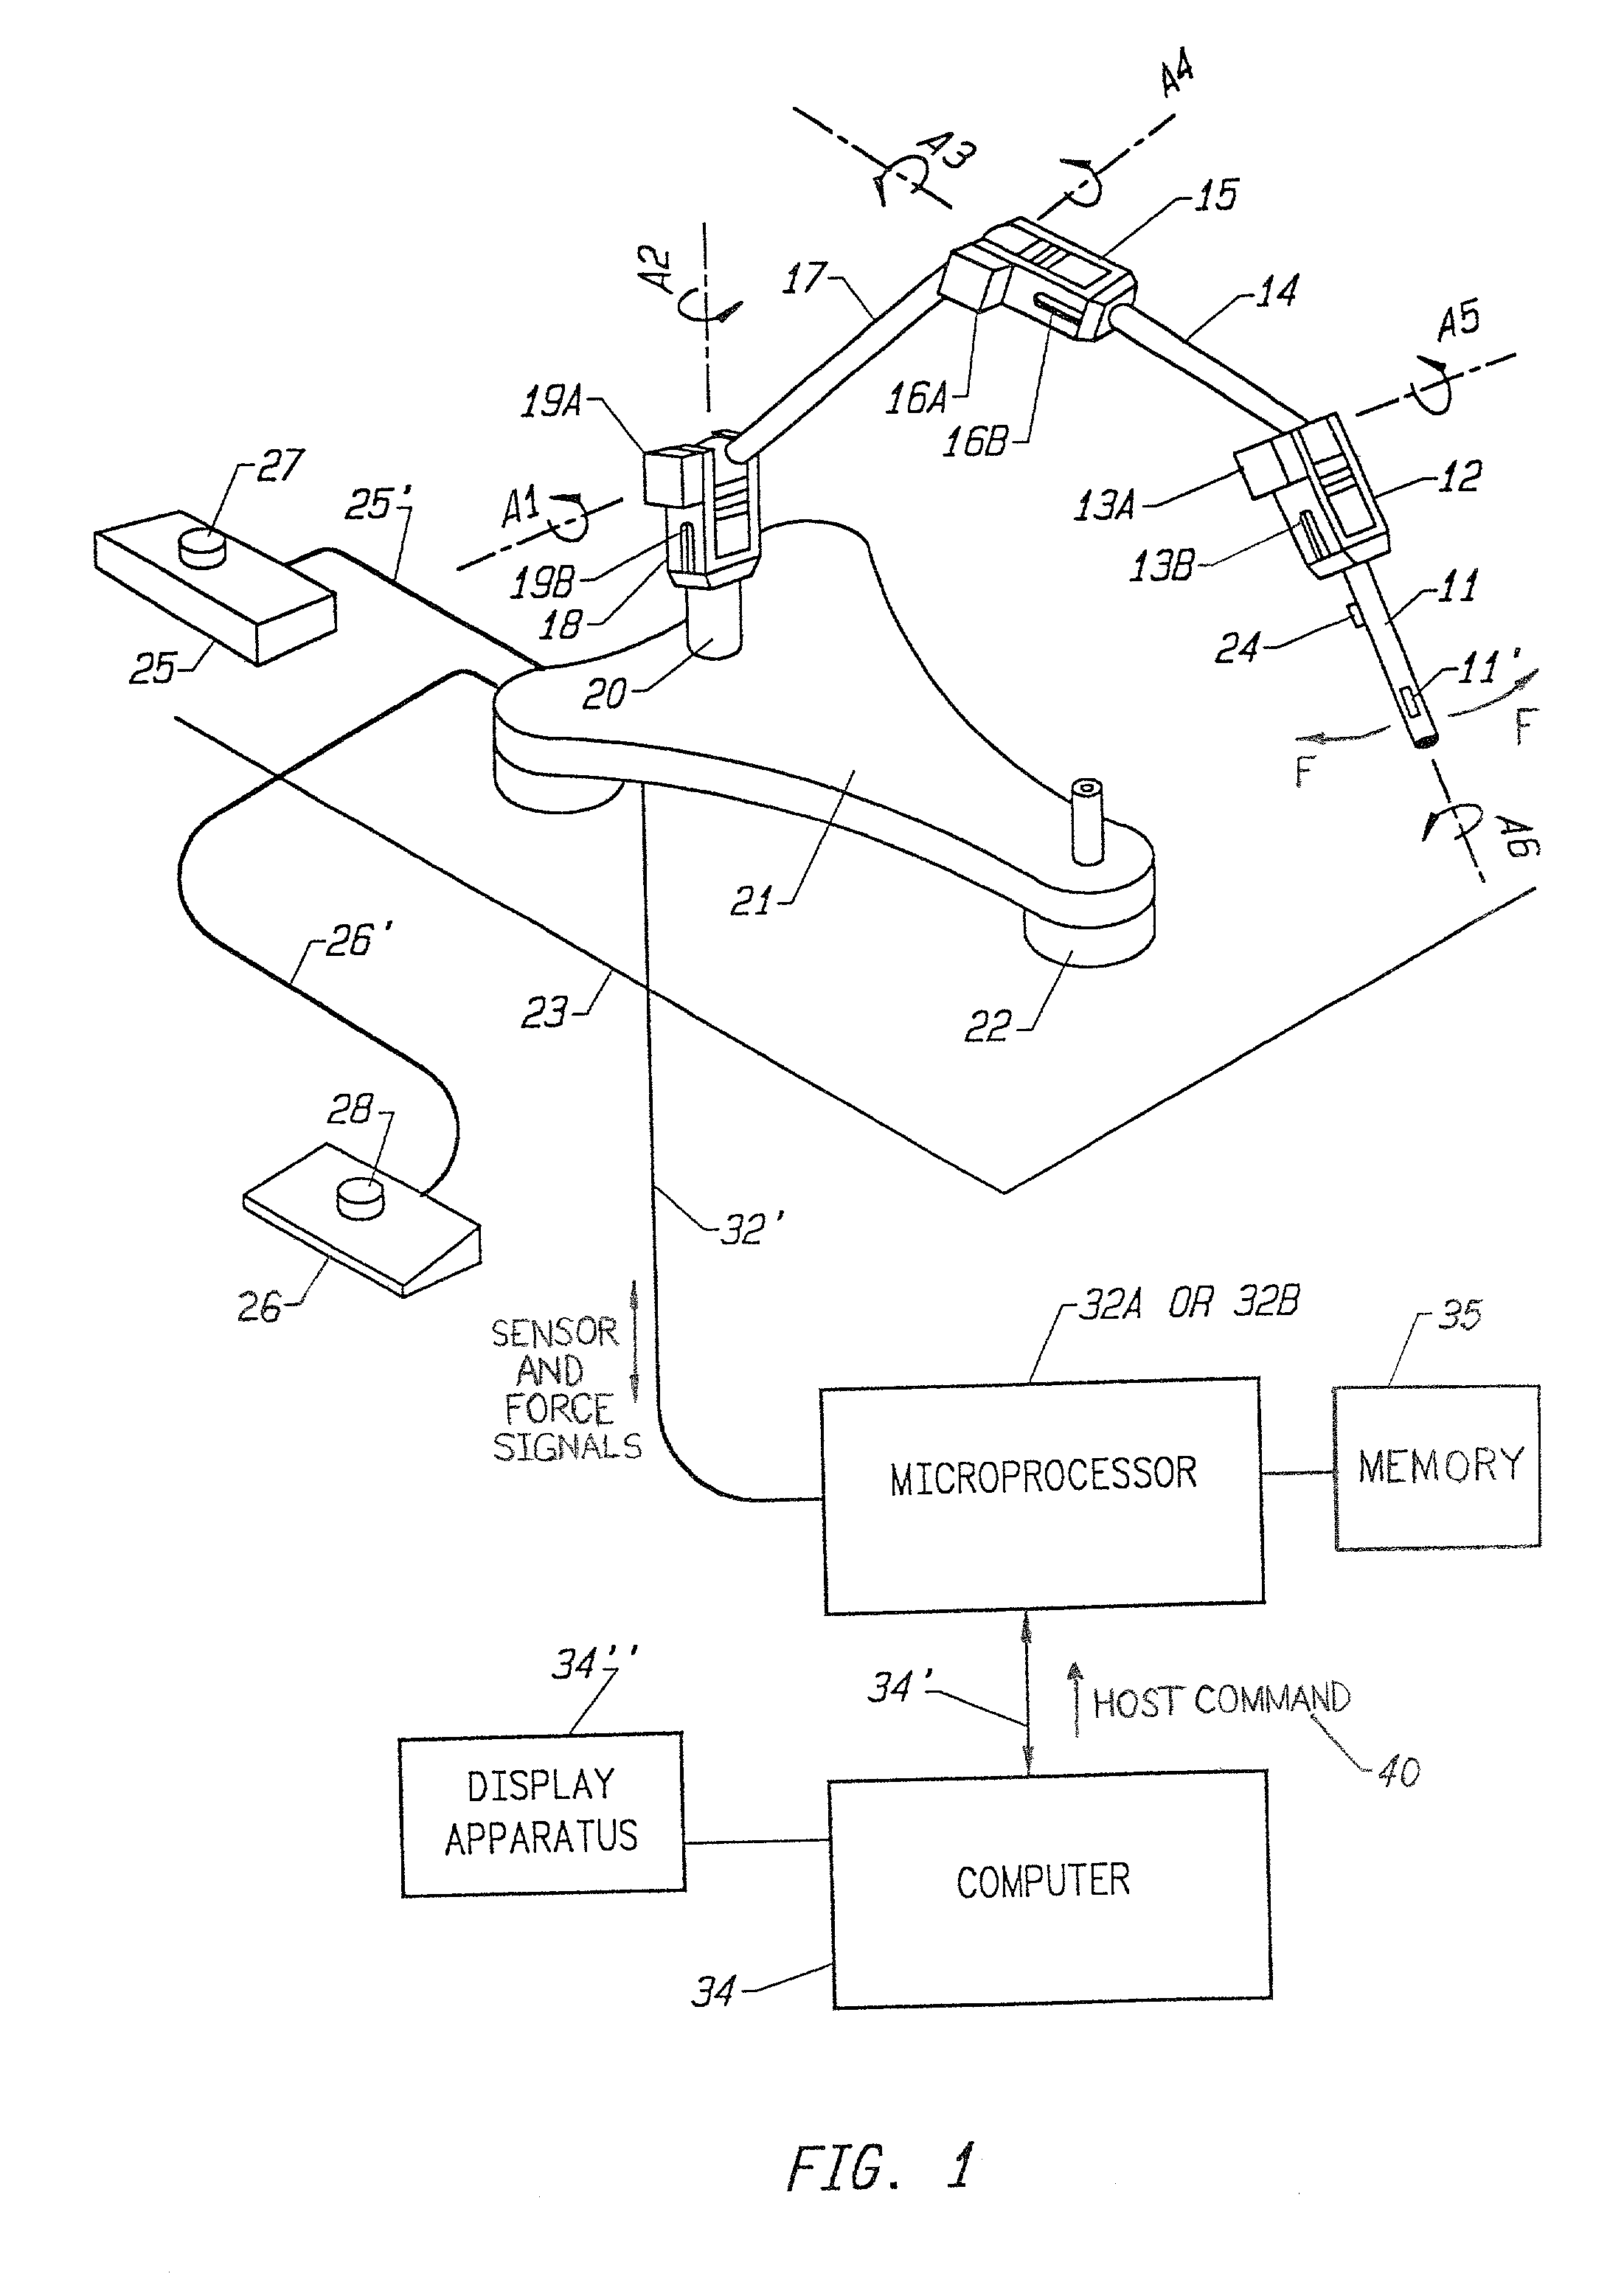 Interface device for sensing position and orientation and outputting force to a user